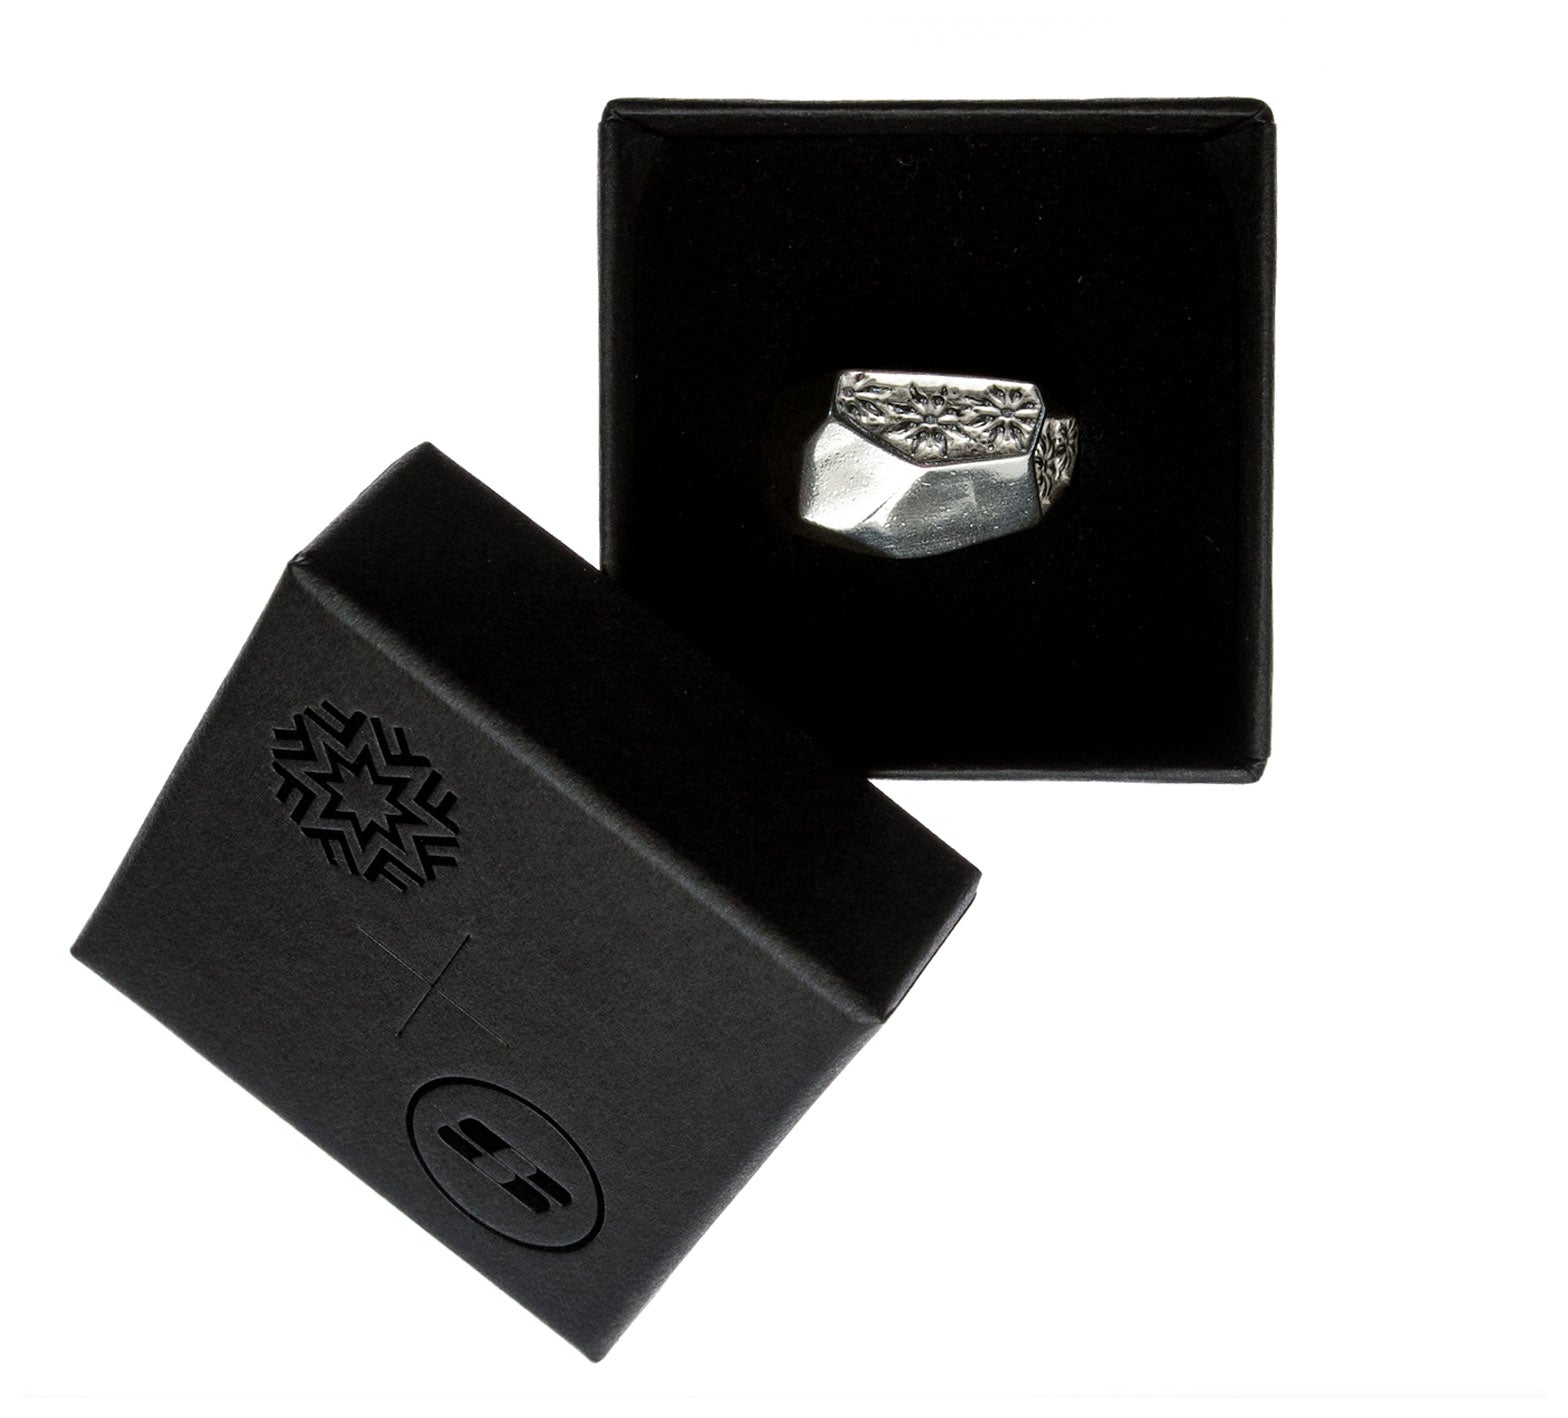 Silver Ring in black jewelry box.